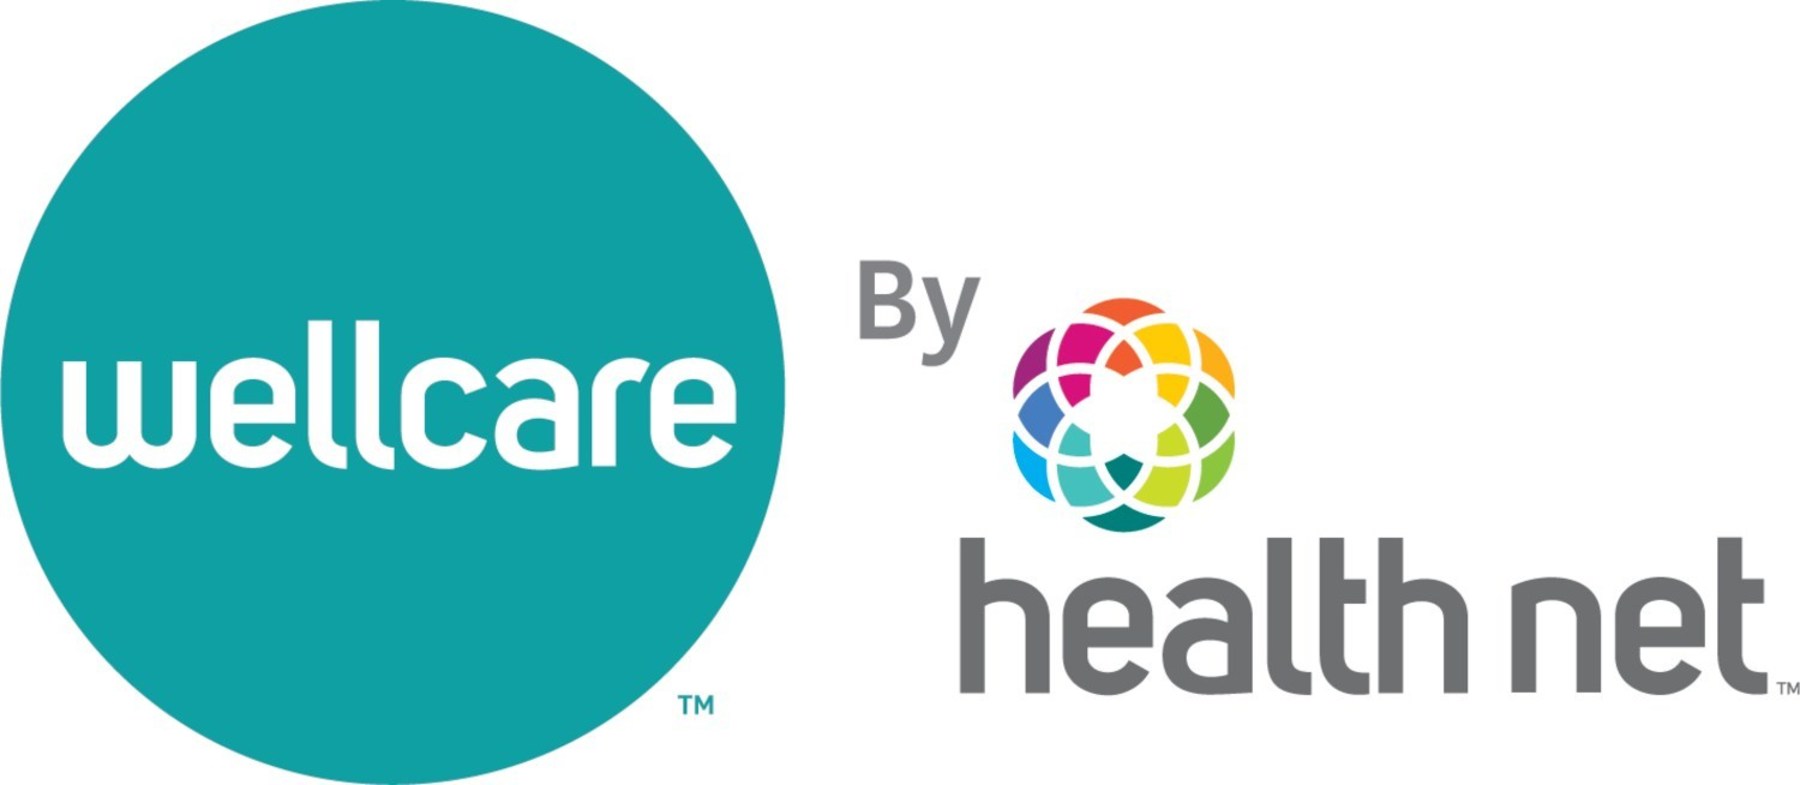 Wellcare by Health Net Medicare Advantage Plans in California Earn 4